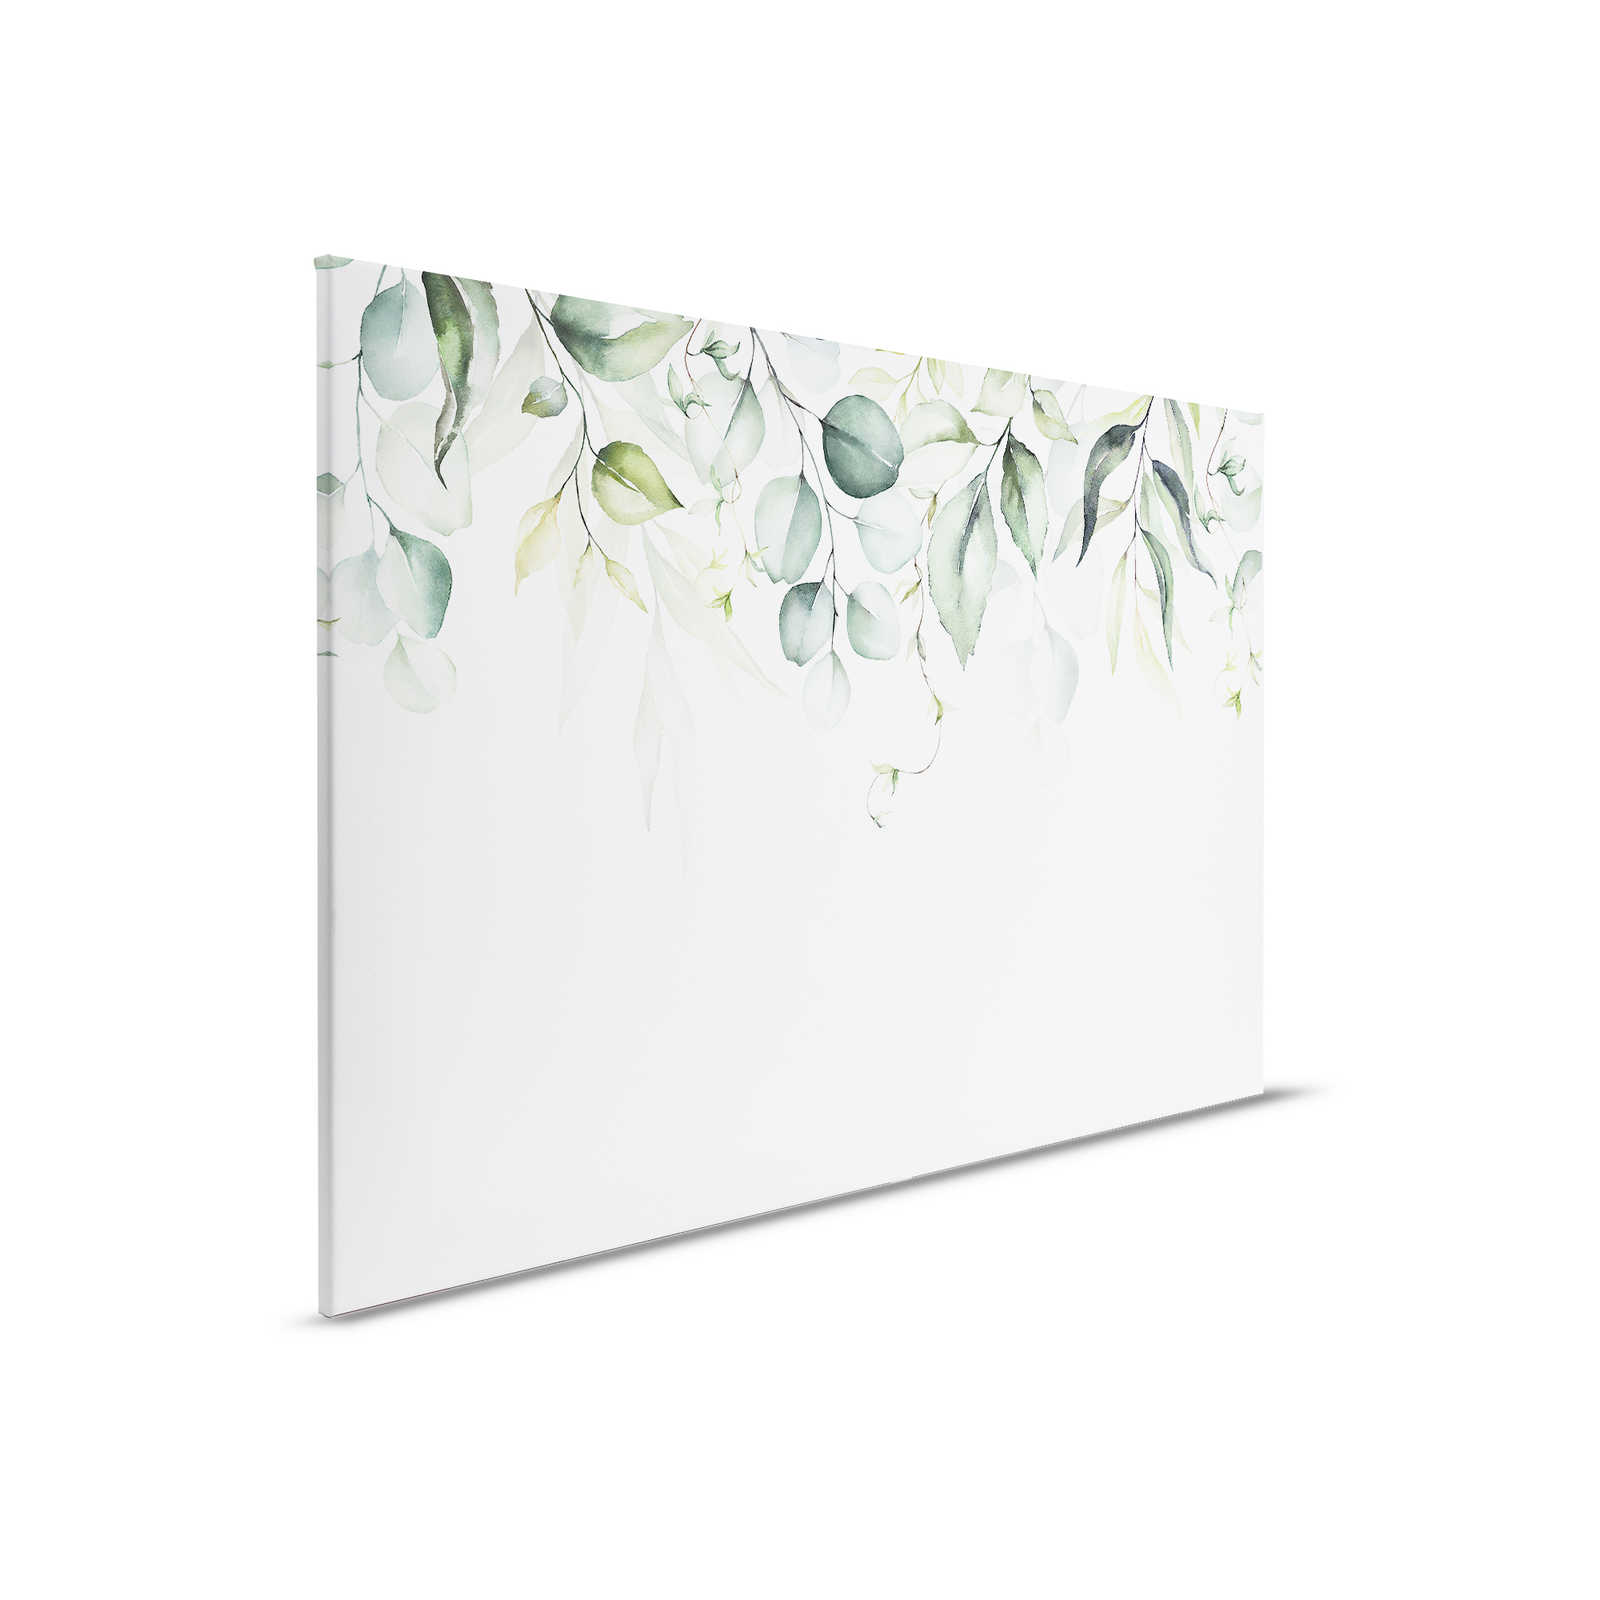         Canvas painting with leaf tendrils in watercolour look - 0.90 m x 0.60 m
    